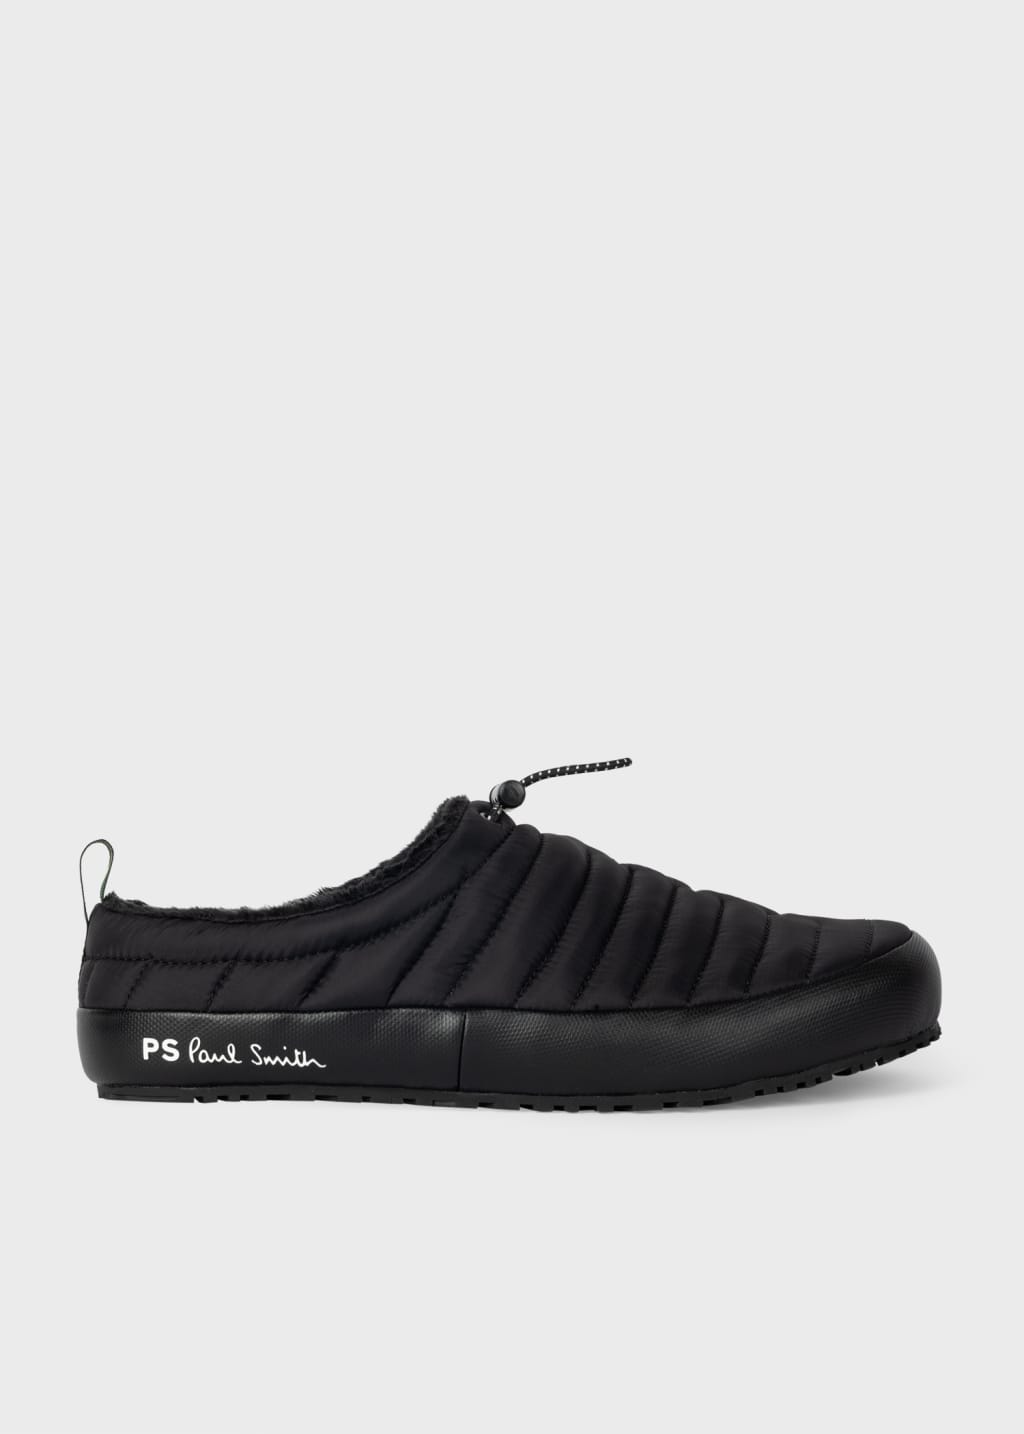 Front View - Black 'Larsen' Mule Slippers Paul Smith